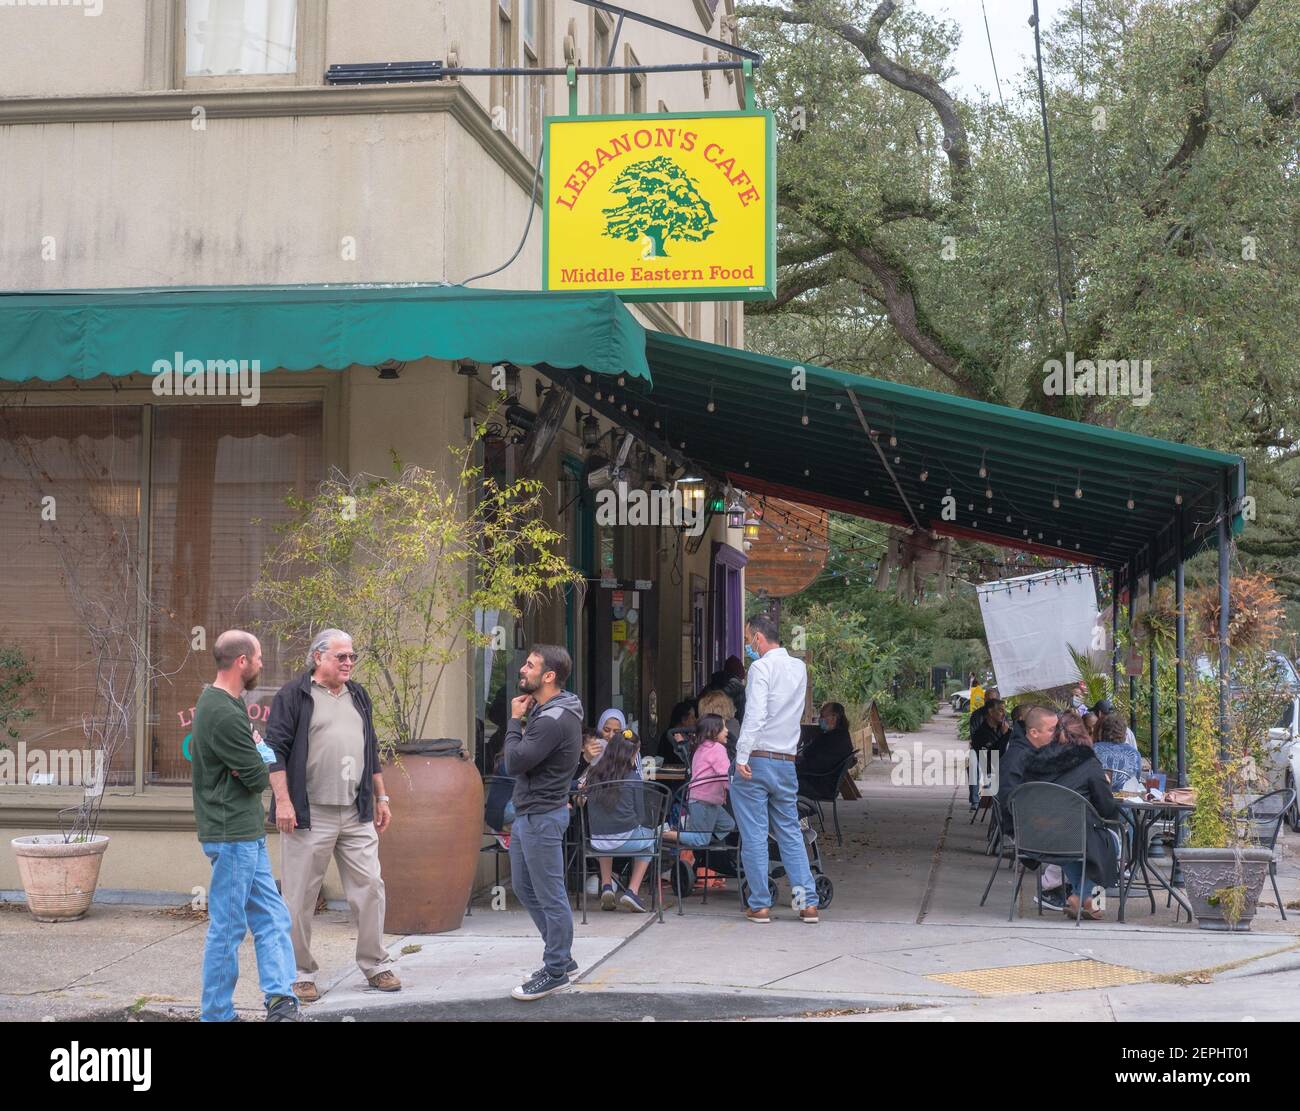 NEW ORLEANS, LA, USA - FEBRUARY 21, 2021: Lebanon's Cafe with customers dining and socializing outside Stock Photo